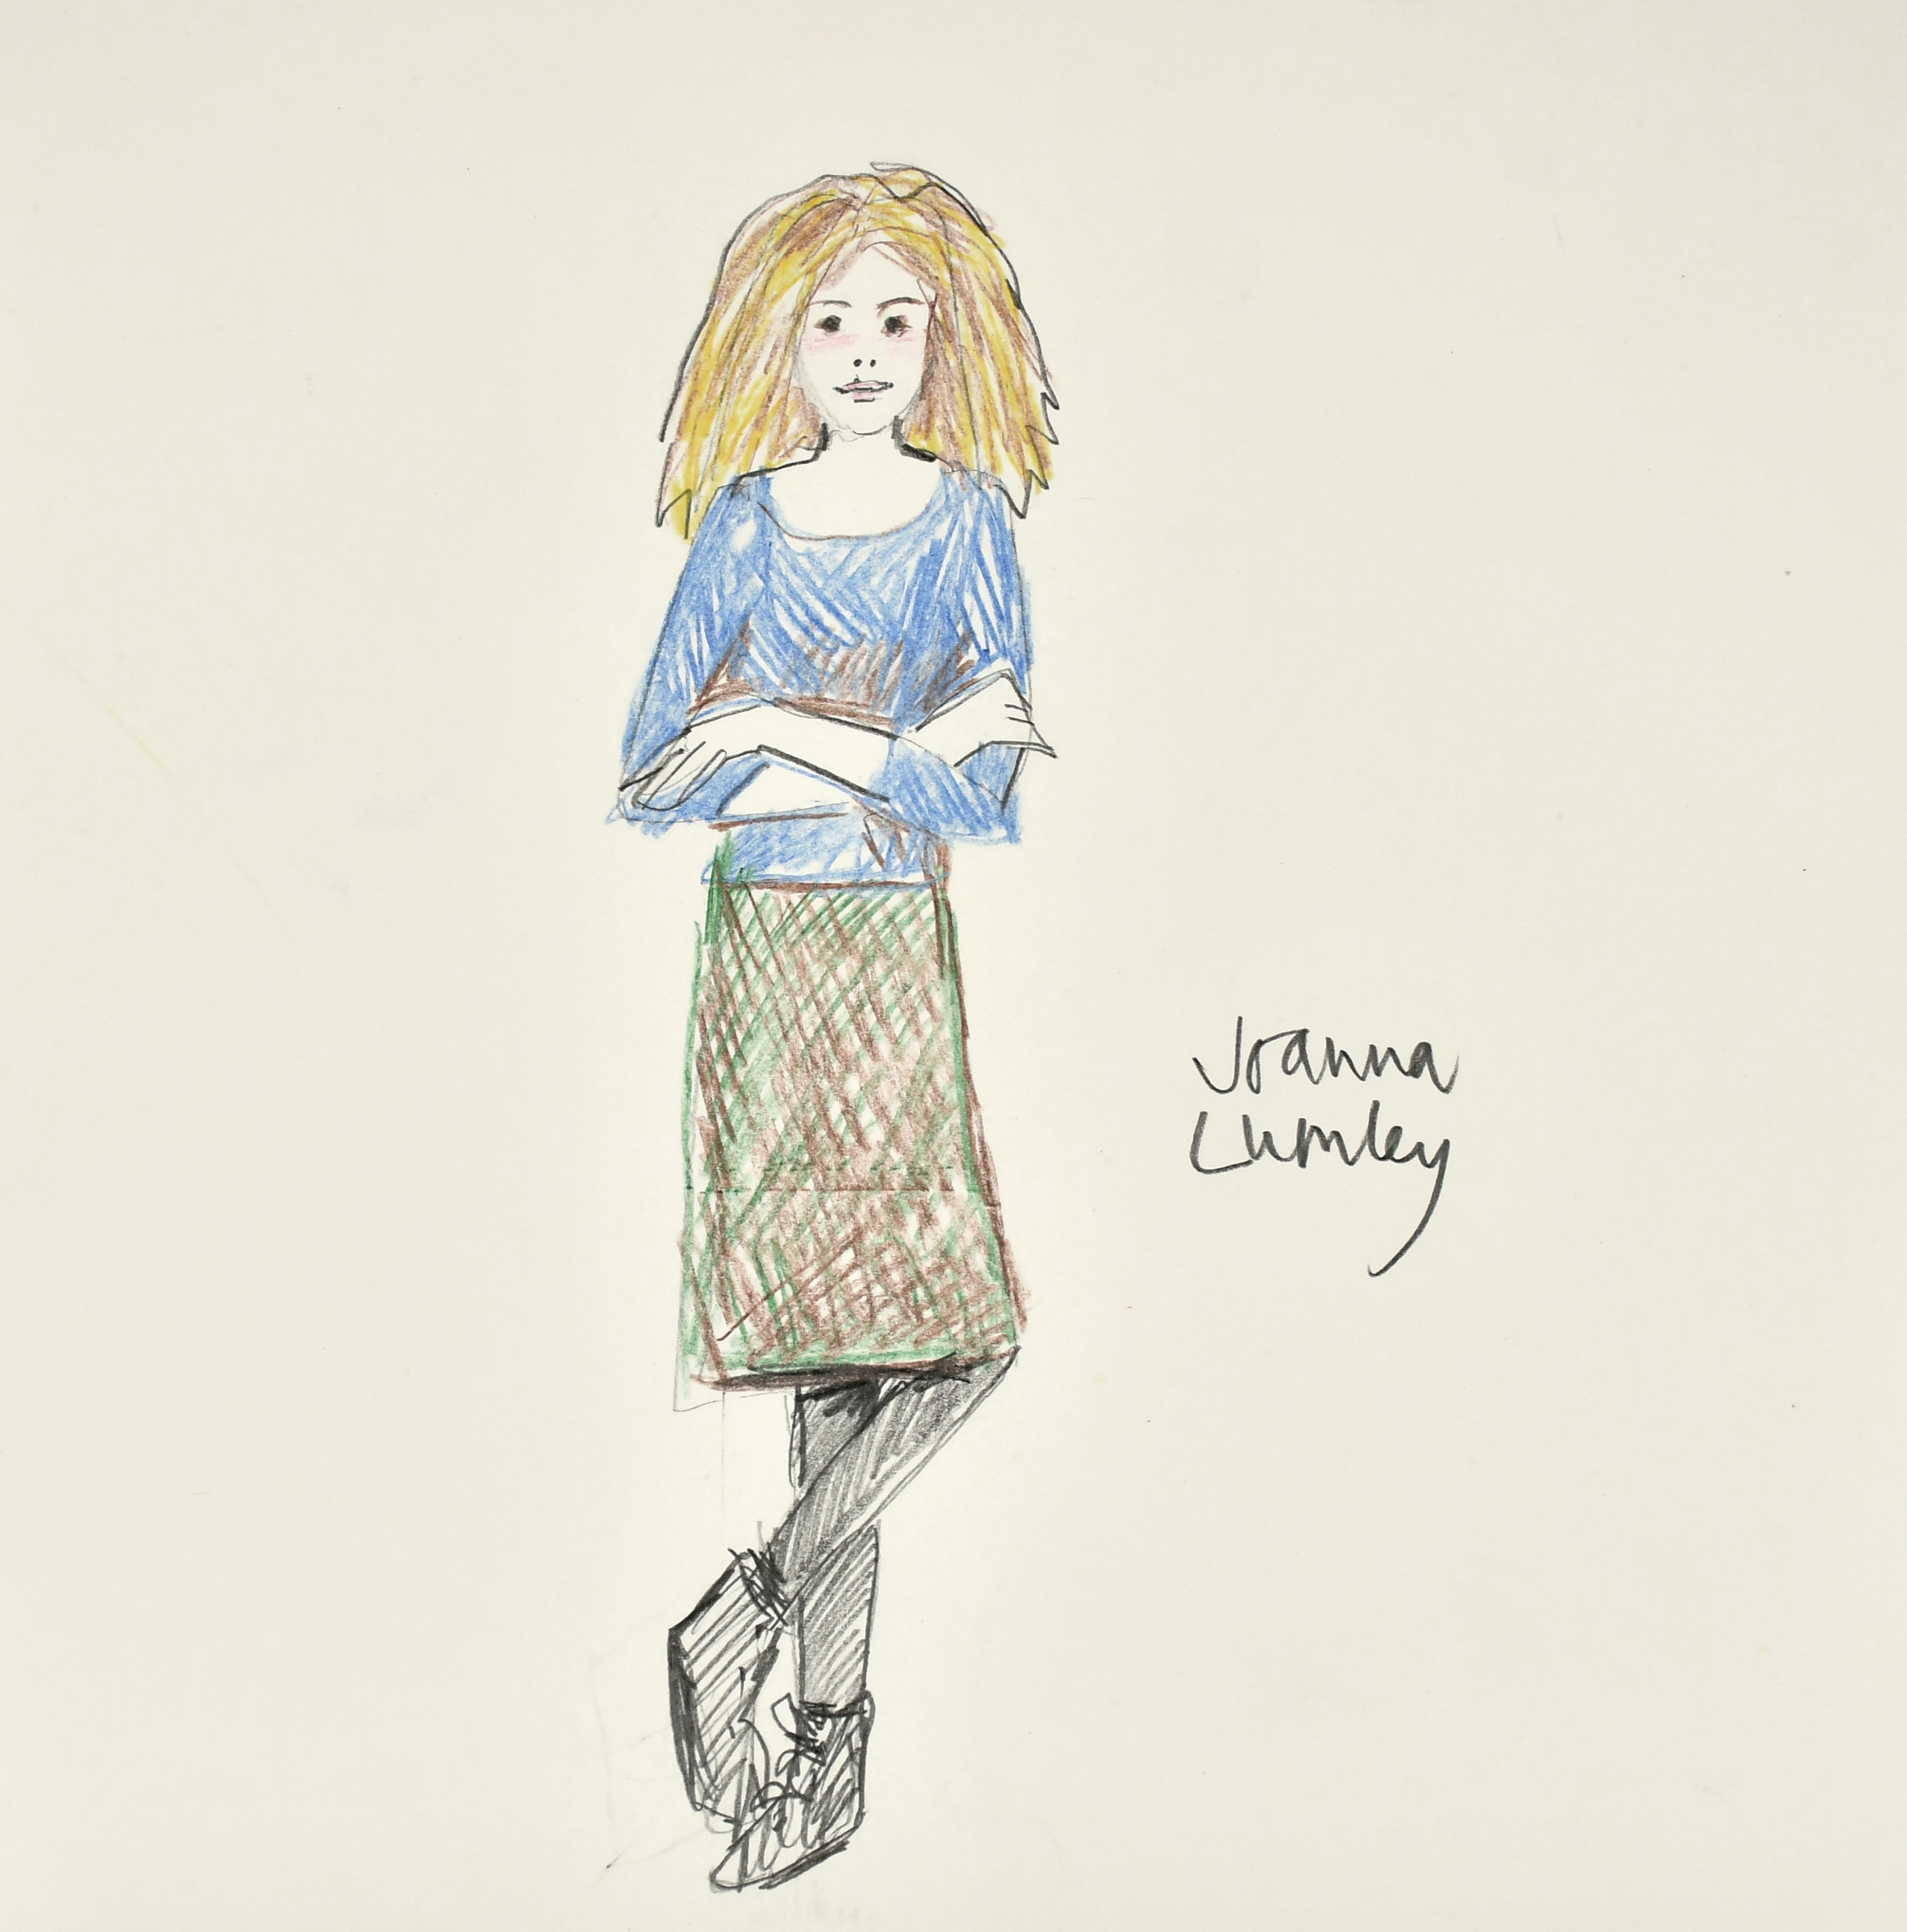 Joanna Lumley (Actor, b.1946). A Self Portrait, Pencil and Crayon, Signed, Unframed 9.75" x 9.75" (